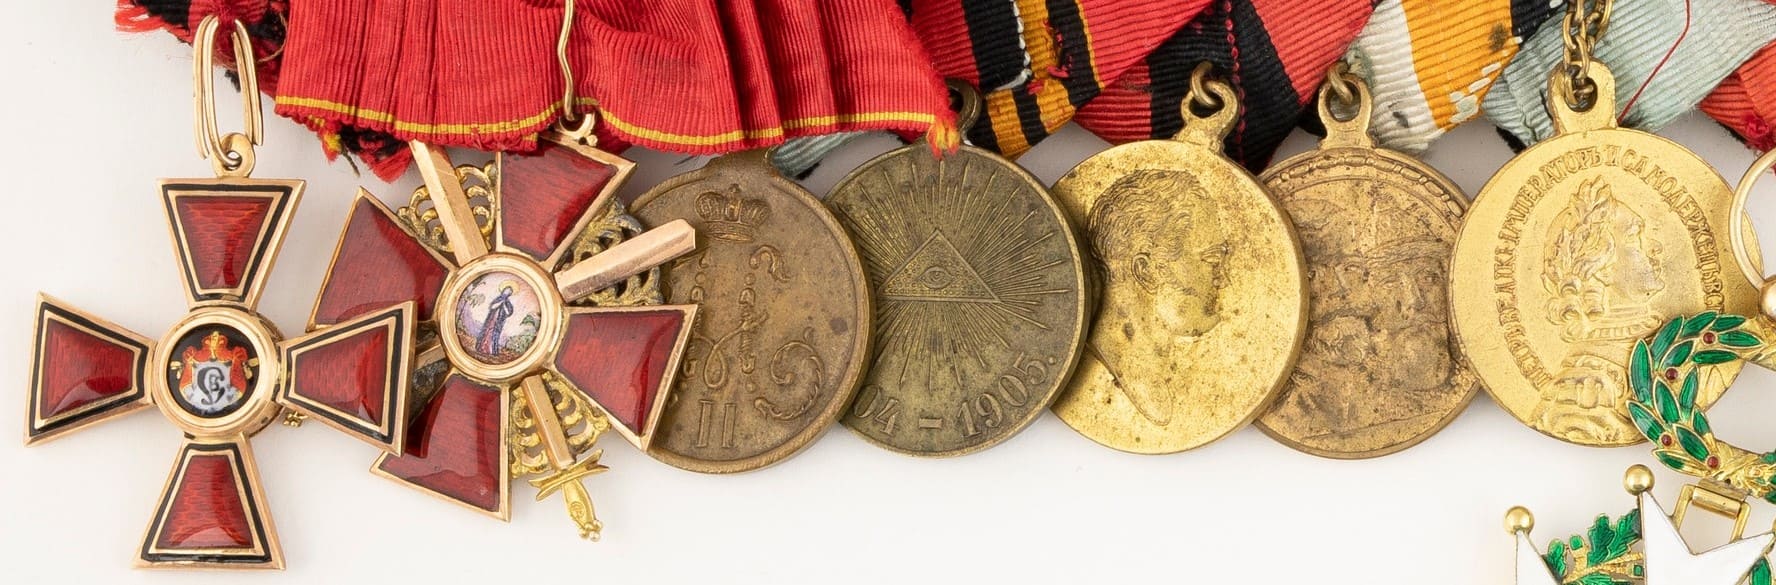 Russian Medal bar with Japanese order.jpg